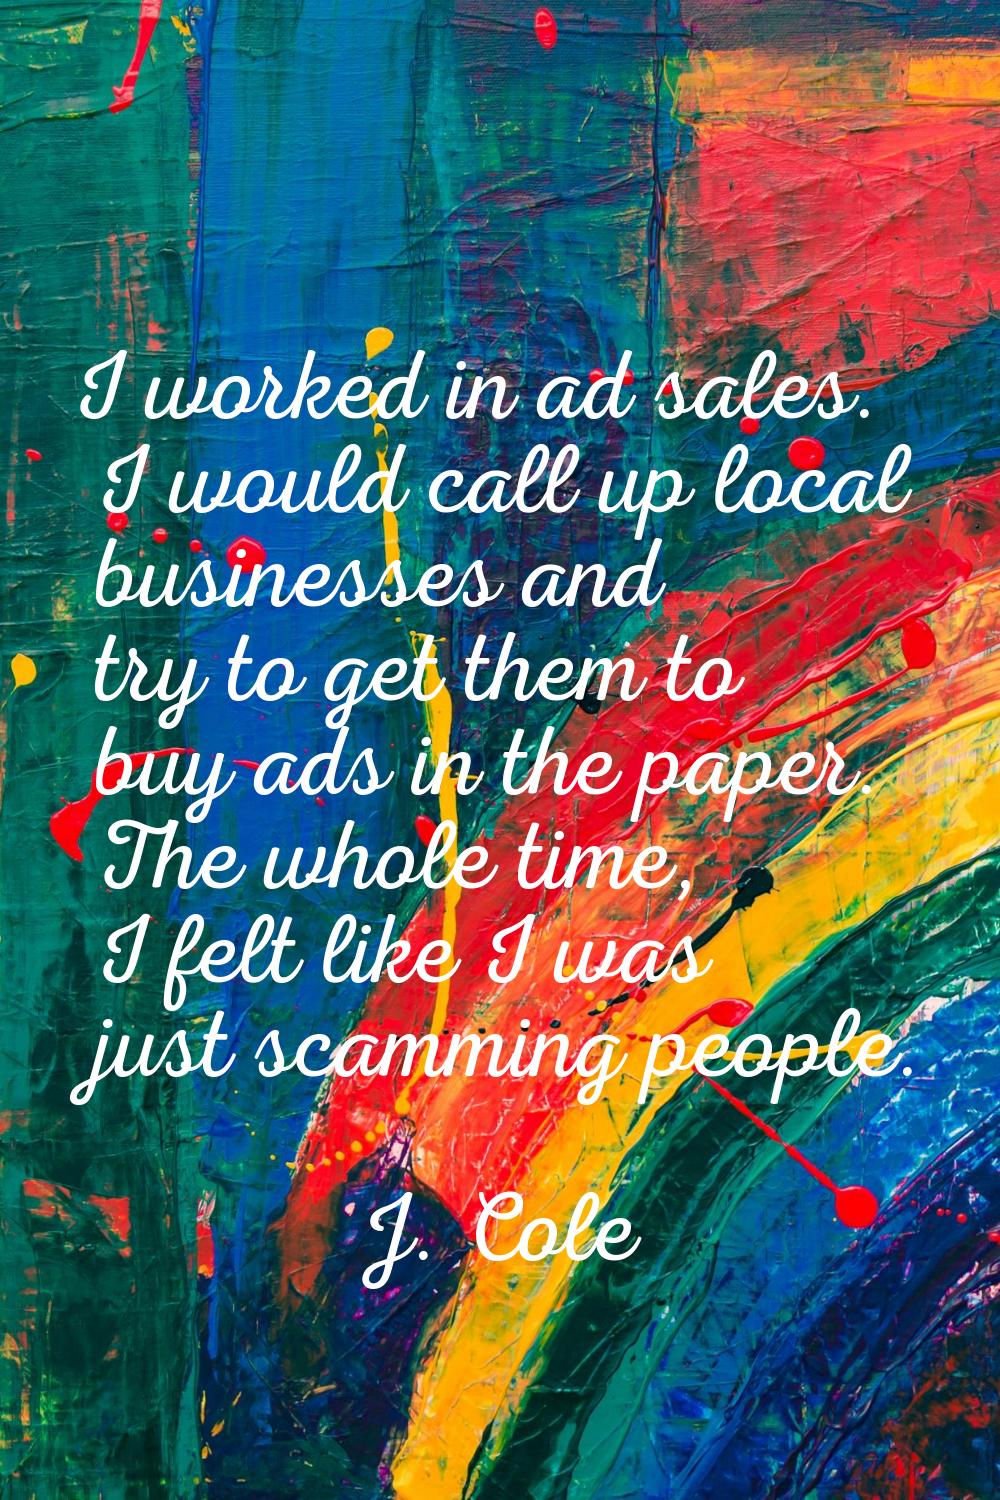 I worked in ad sales. I would call up local businesses and try to get them to buy ads in the paper.